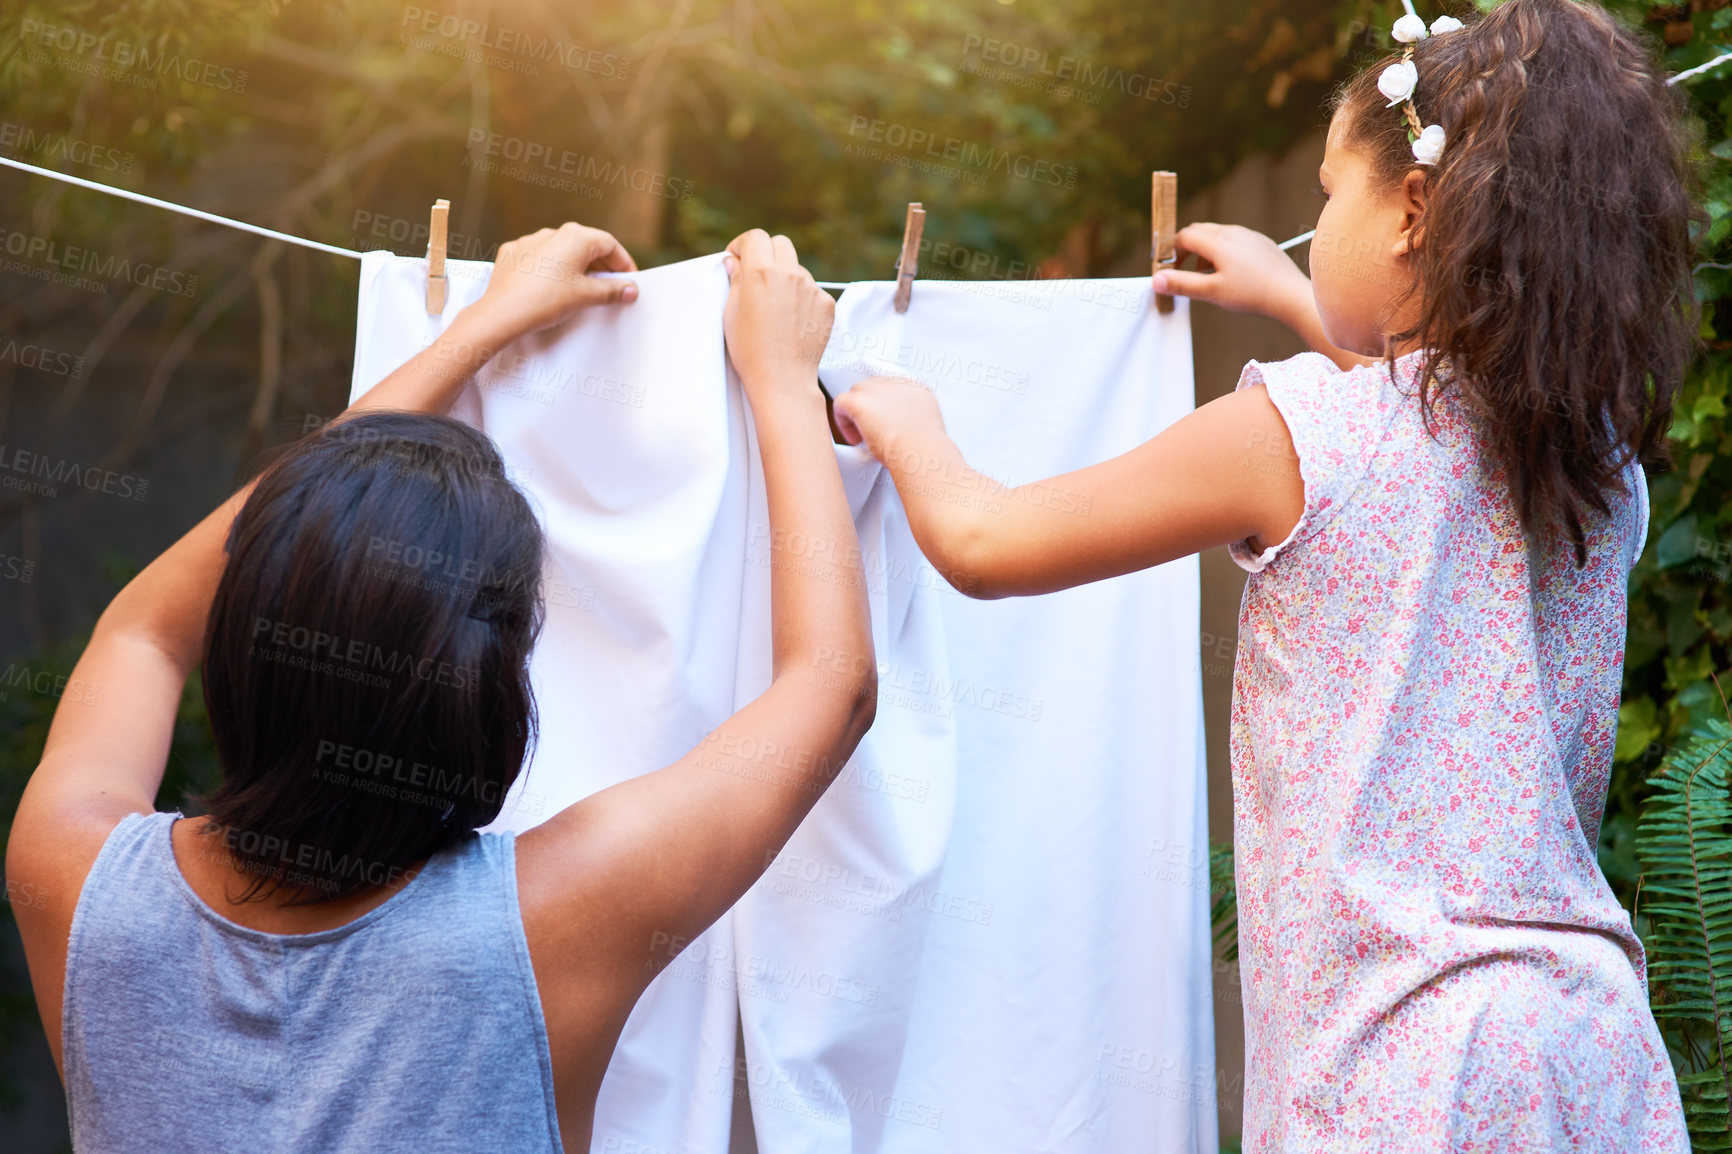 Buy stock photo Teamwork, hanging laundry and a mother and child doing housework, chores and busy with clothes. Cleaning, family and back of a little girl helping mom with clothing on the line in backyard together